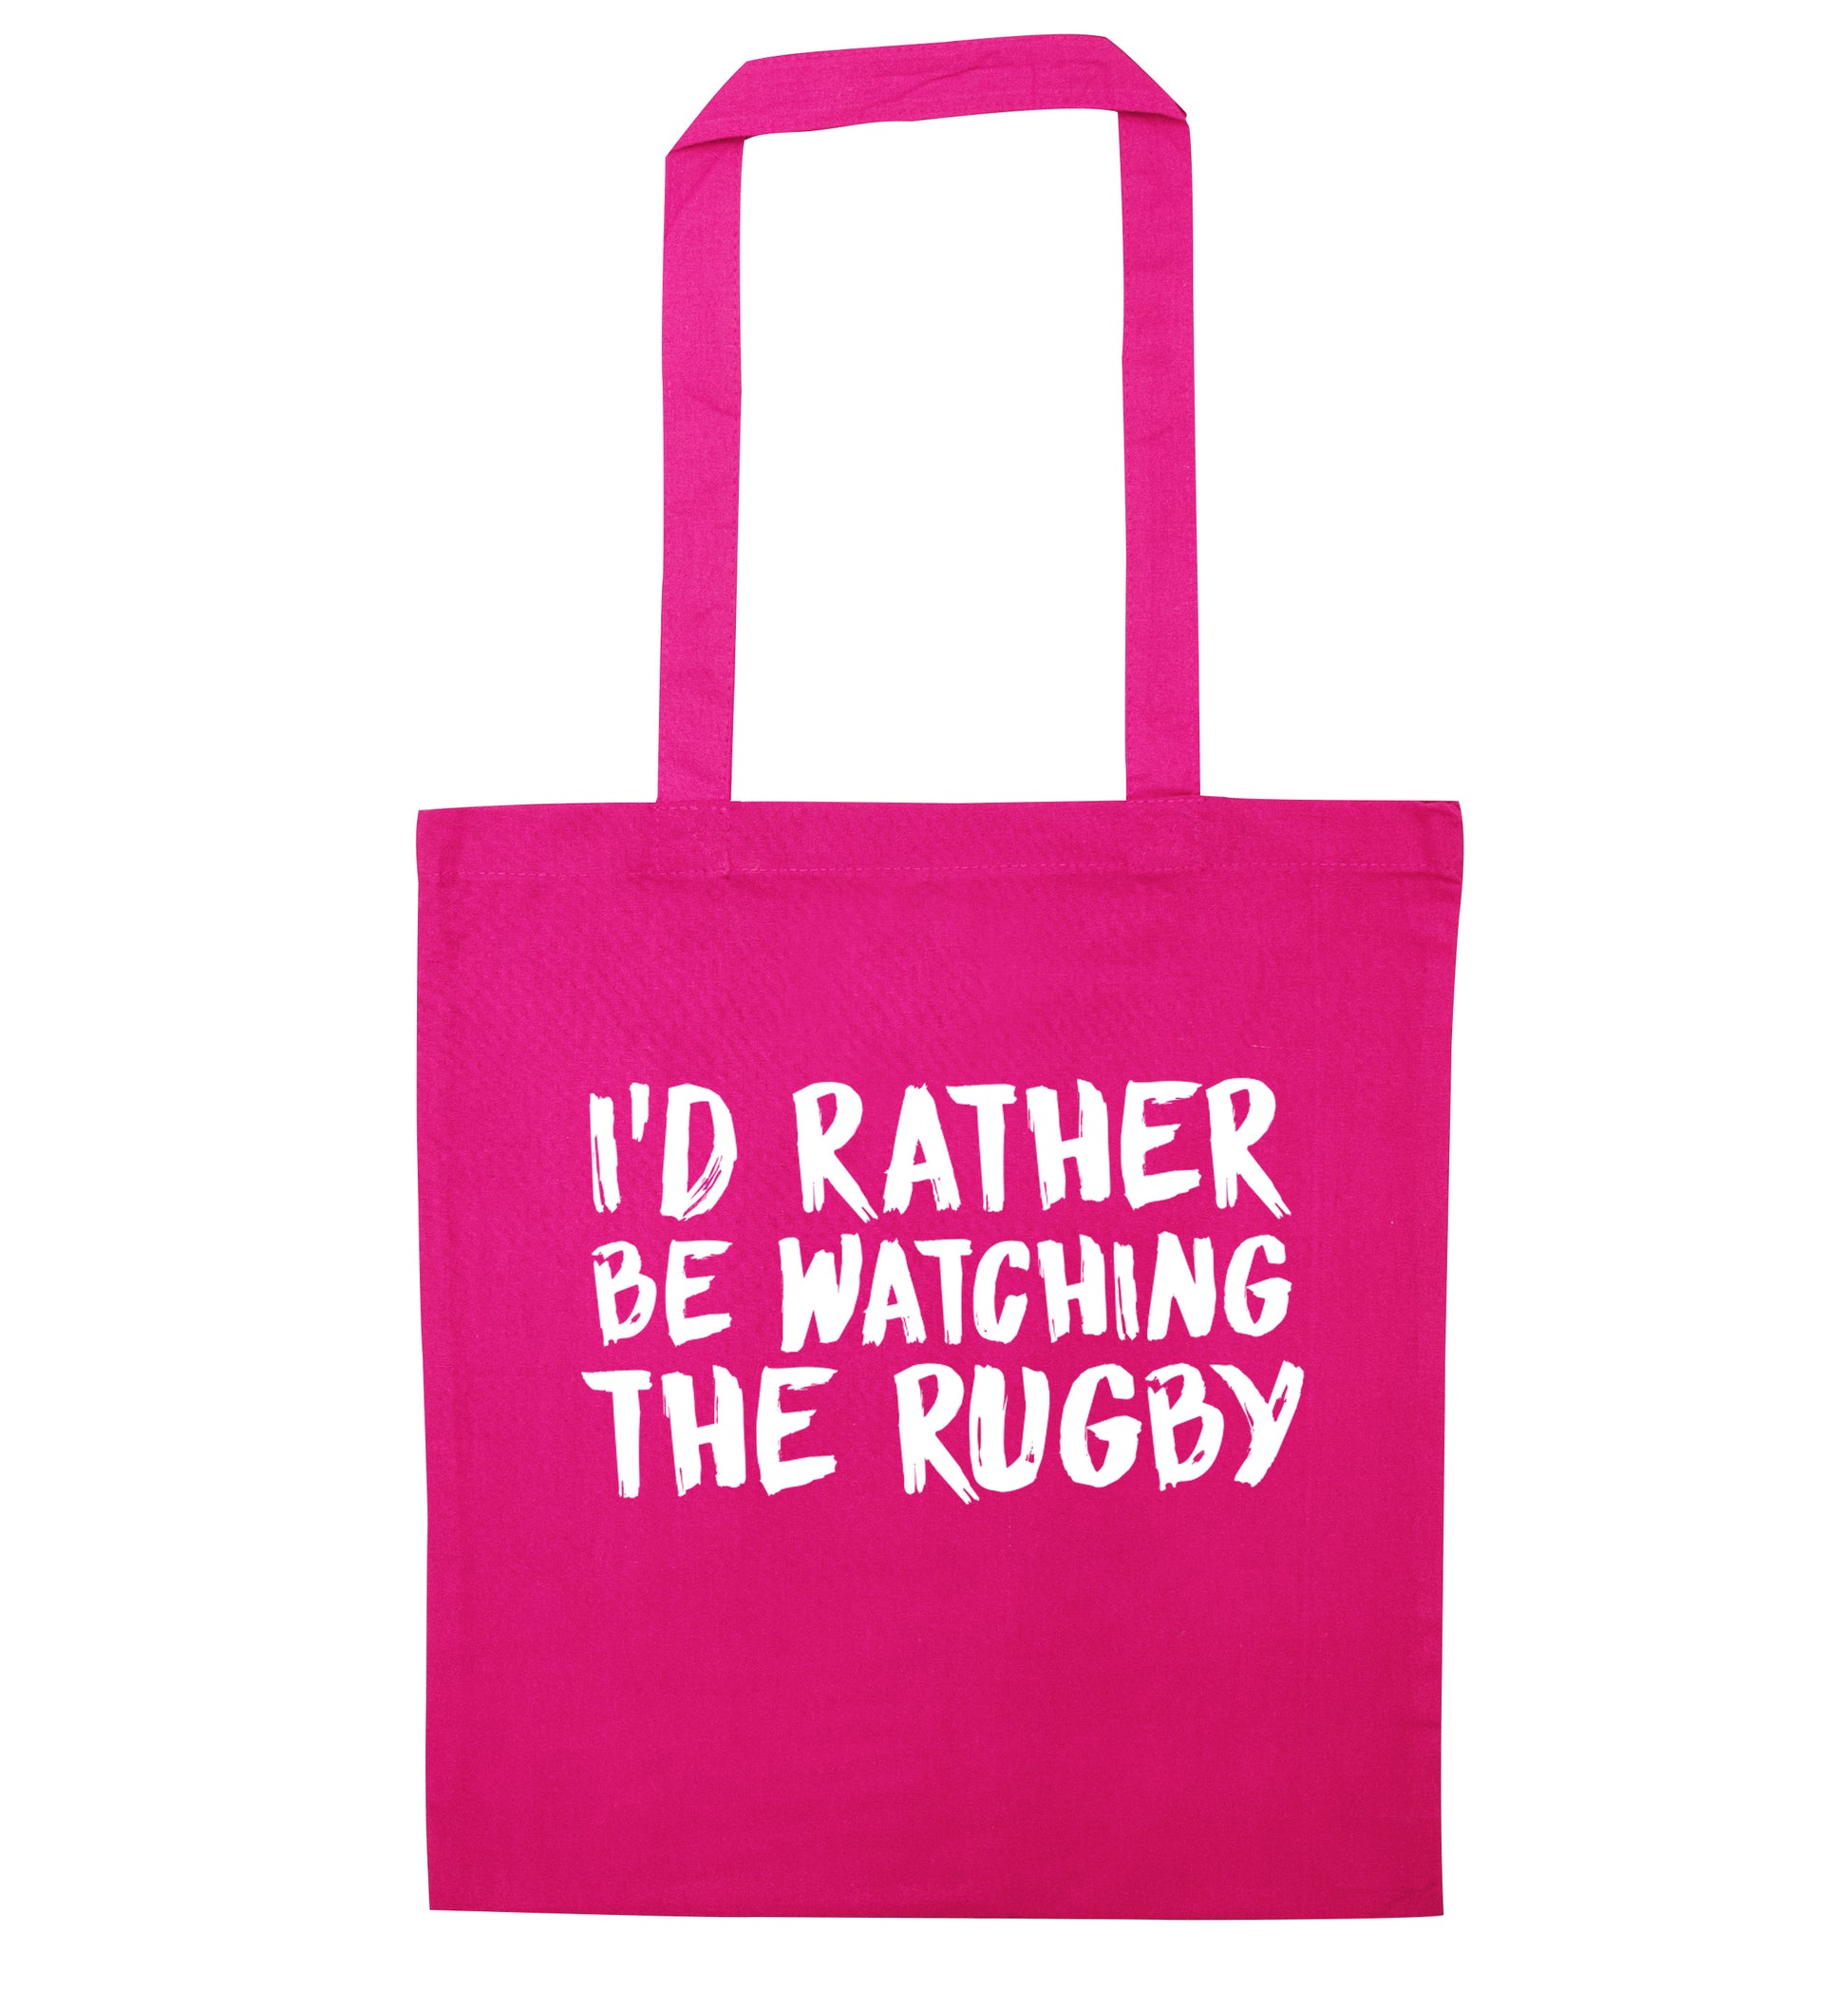 I'd rather be watching the rugby pink tote bag